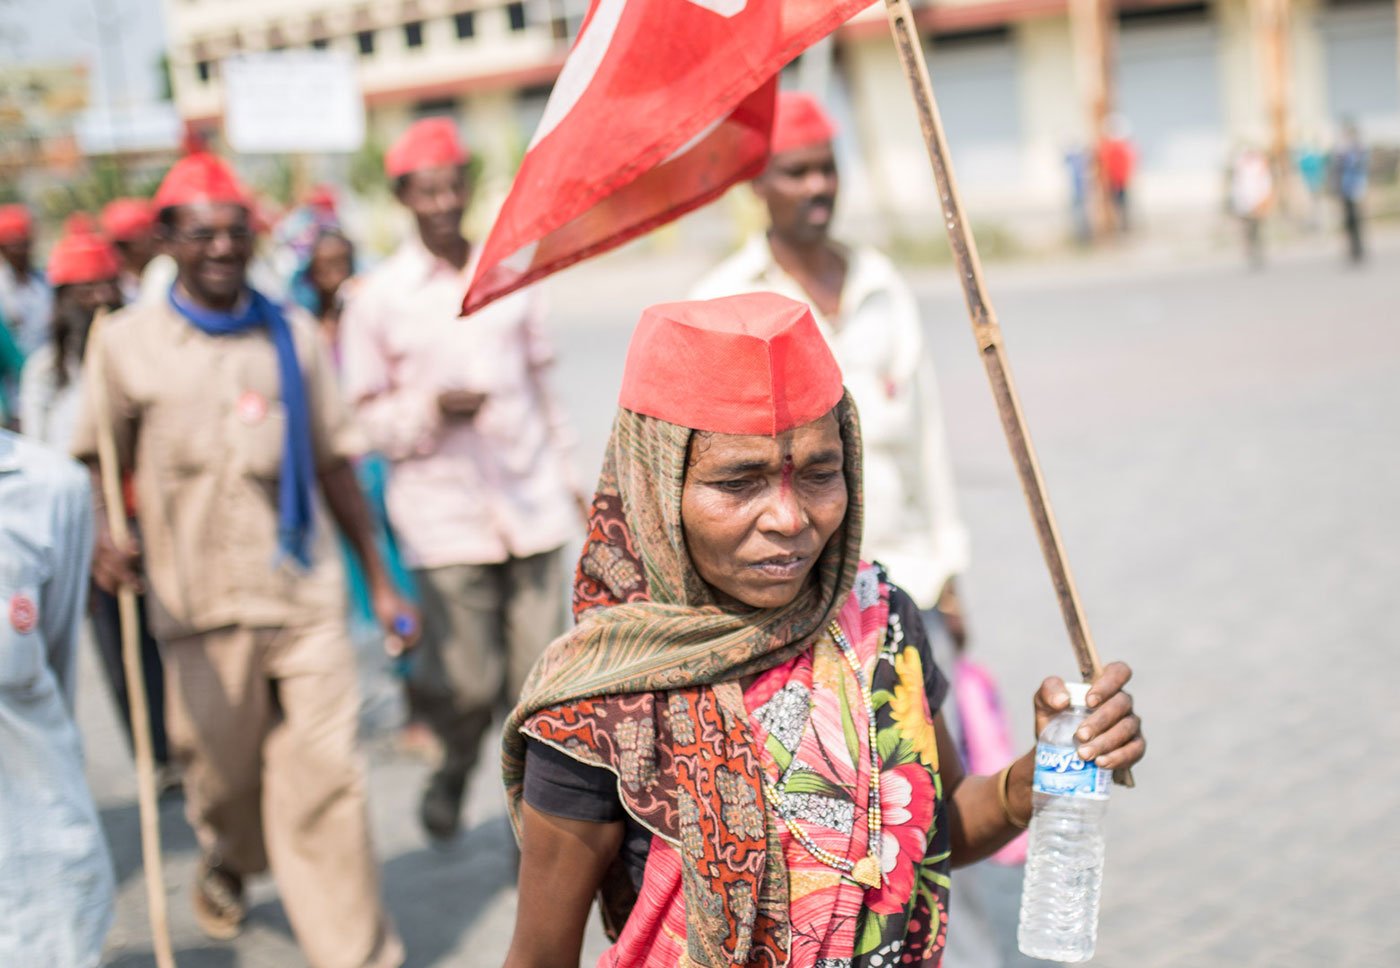 A woman marching alongside others, holding a red flag and a plastic bottle in her hand